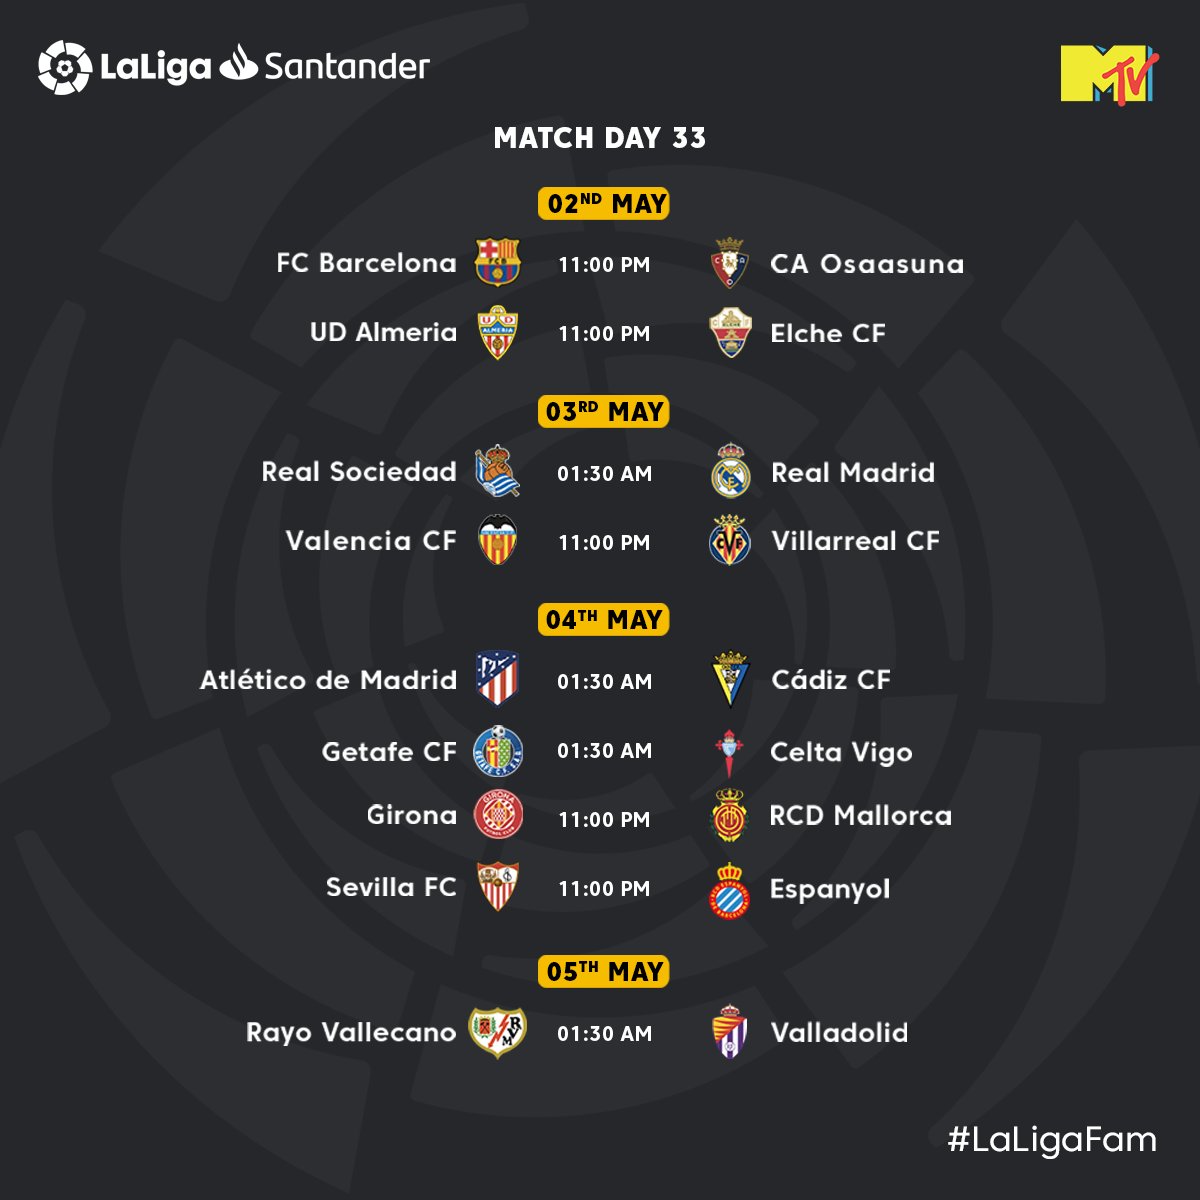 @LaLigaEN is back with back to back matchdays! Here is the schedule for this week!

#LaLigaSantander #LaLigaOnMTV #KickoffLaLigaSantander #ScheduleCard #LaLigaFam